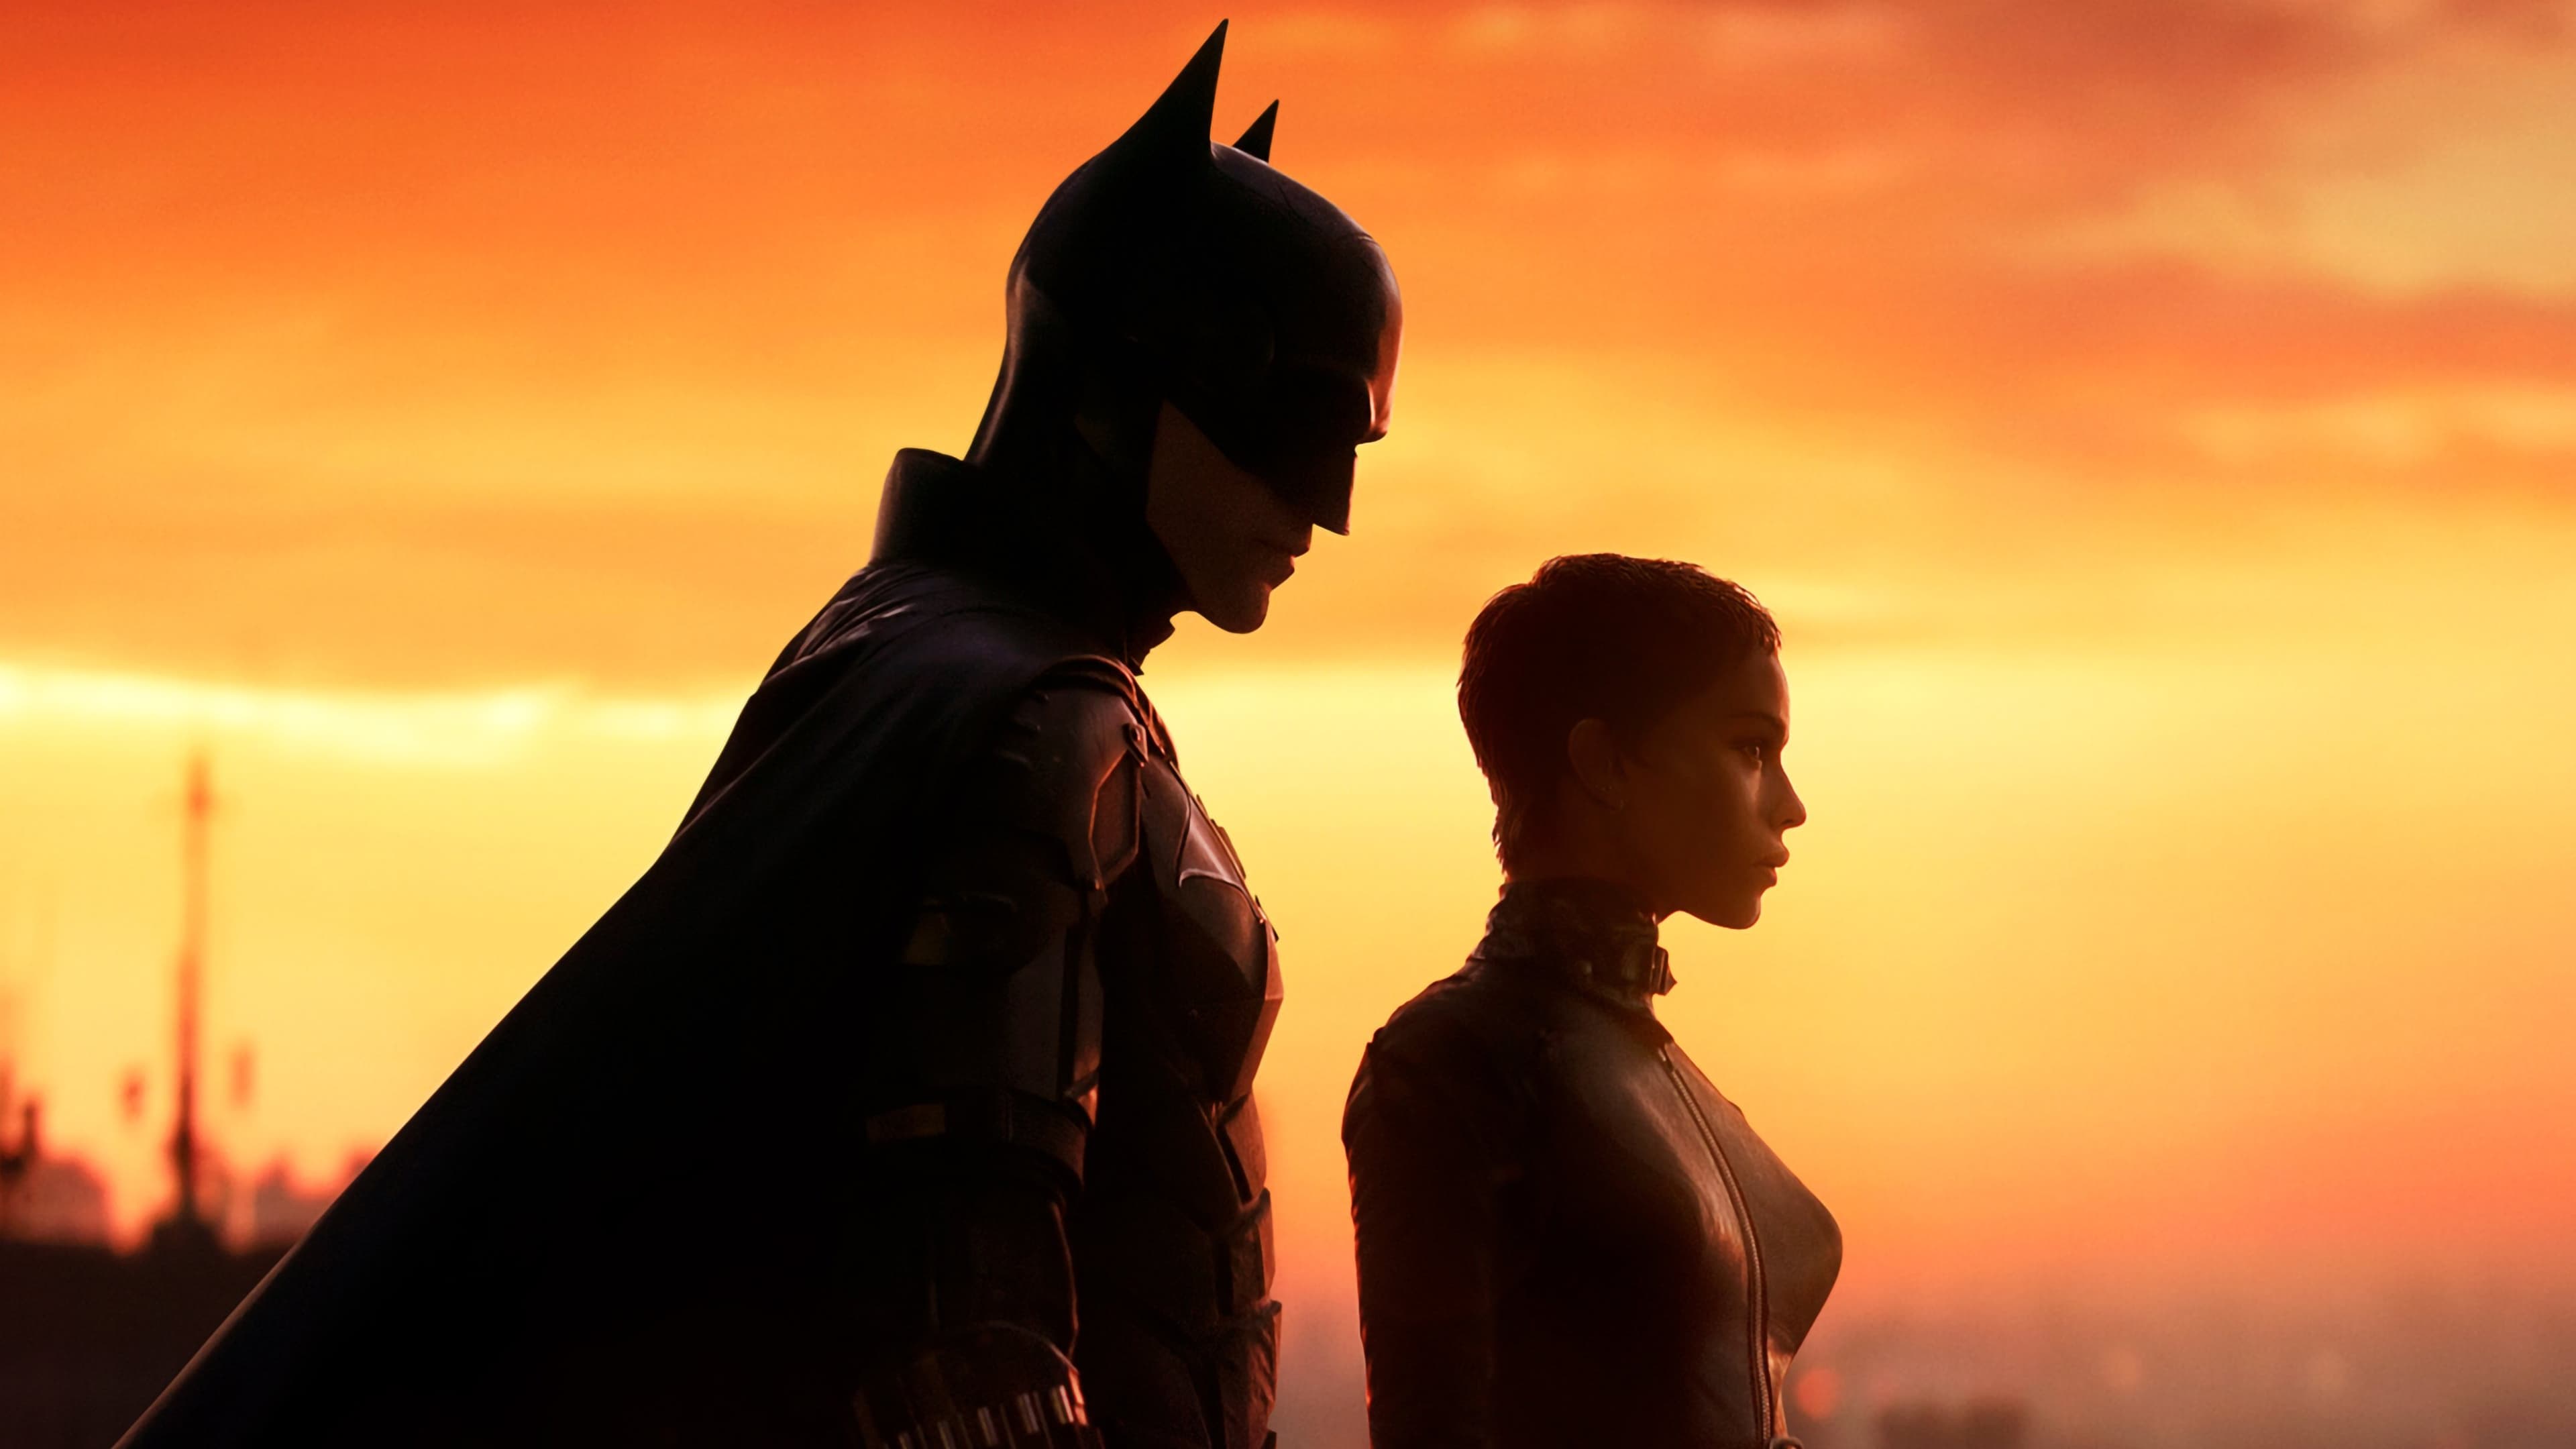 Batman with Catwoman in The Batman (2022).